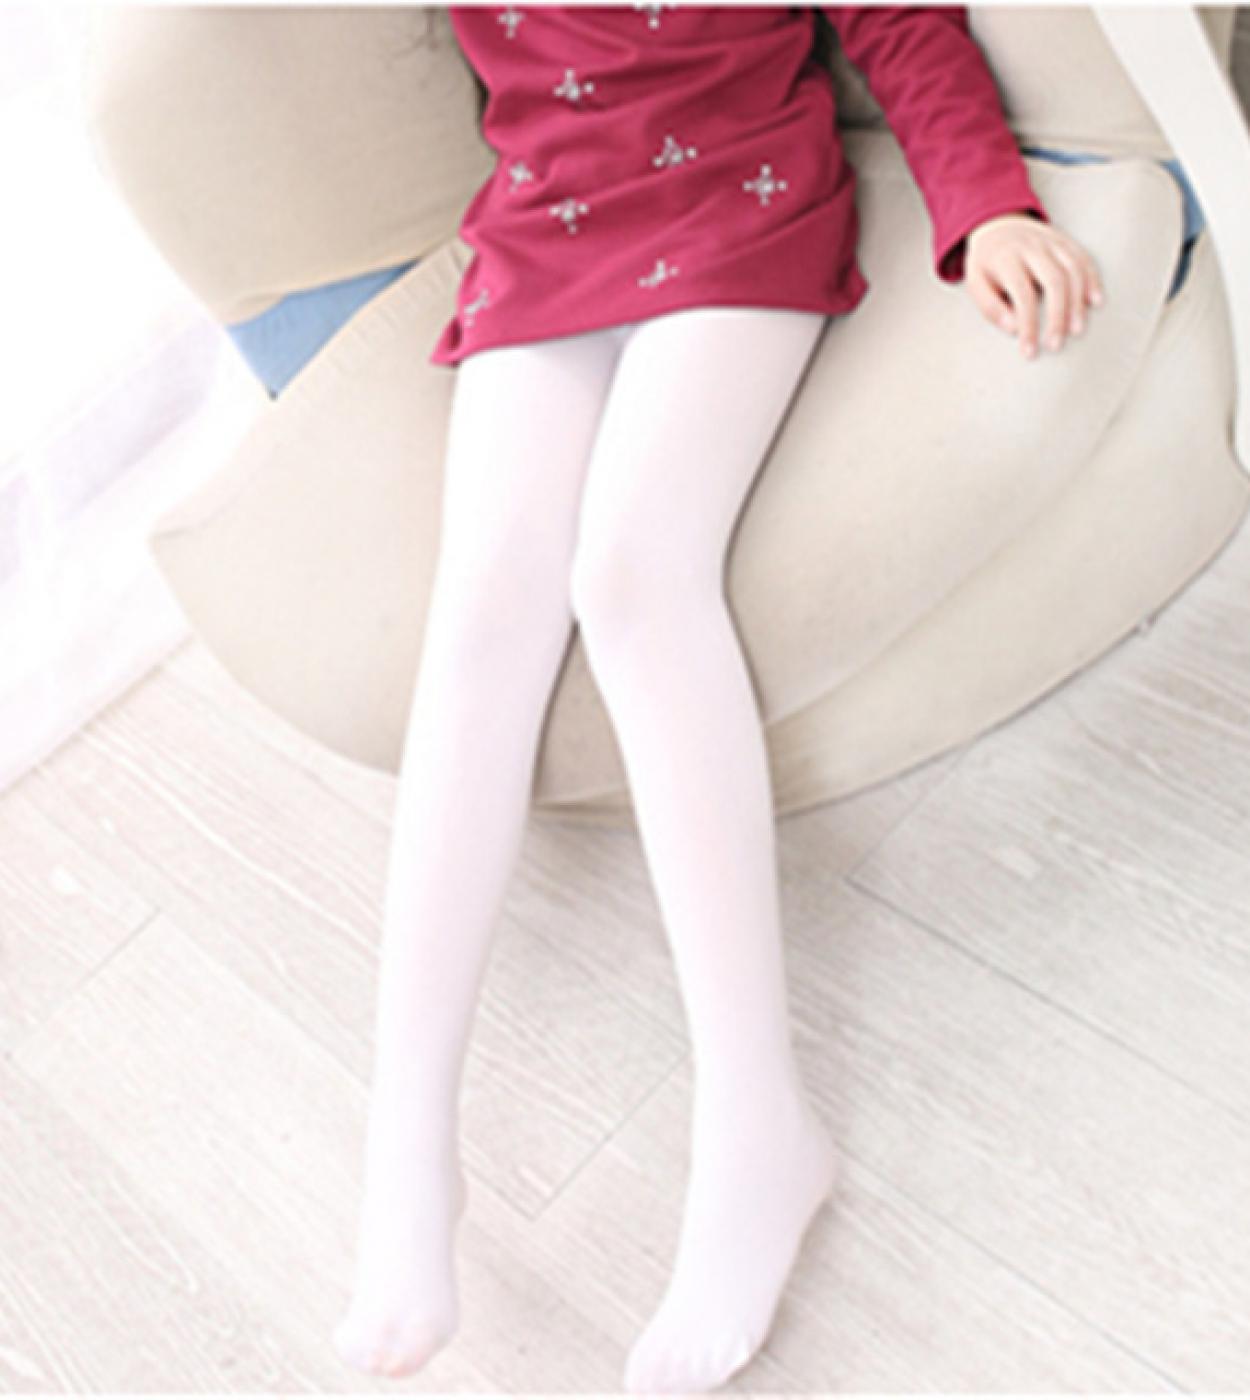 Girls Leggings Winter Autumn Cotton Kids Stockings Stretchy Solid Pants  Toddlers Kids Pants Girls Pantyhose For 2 8 Yrs